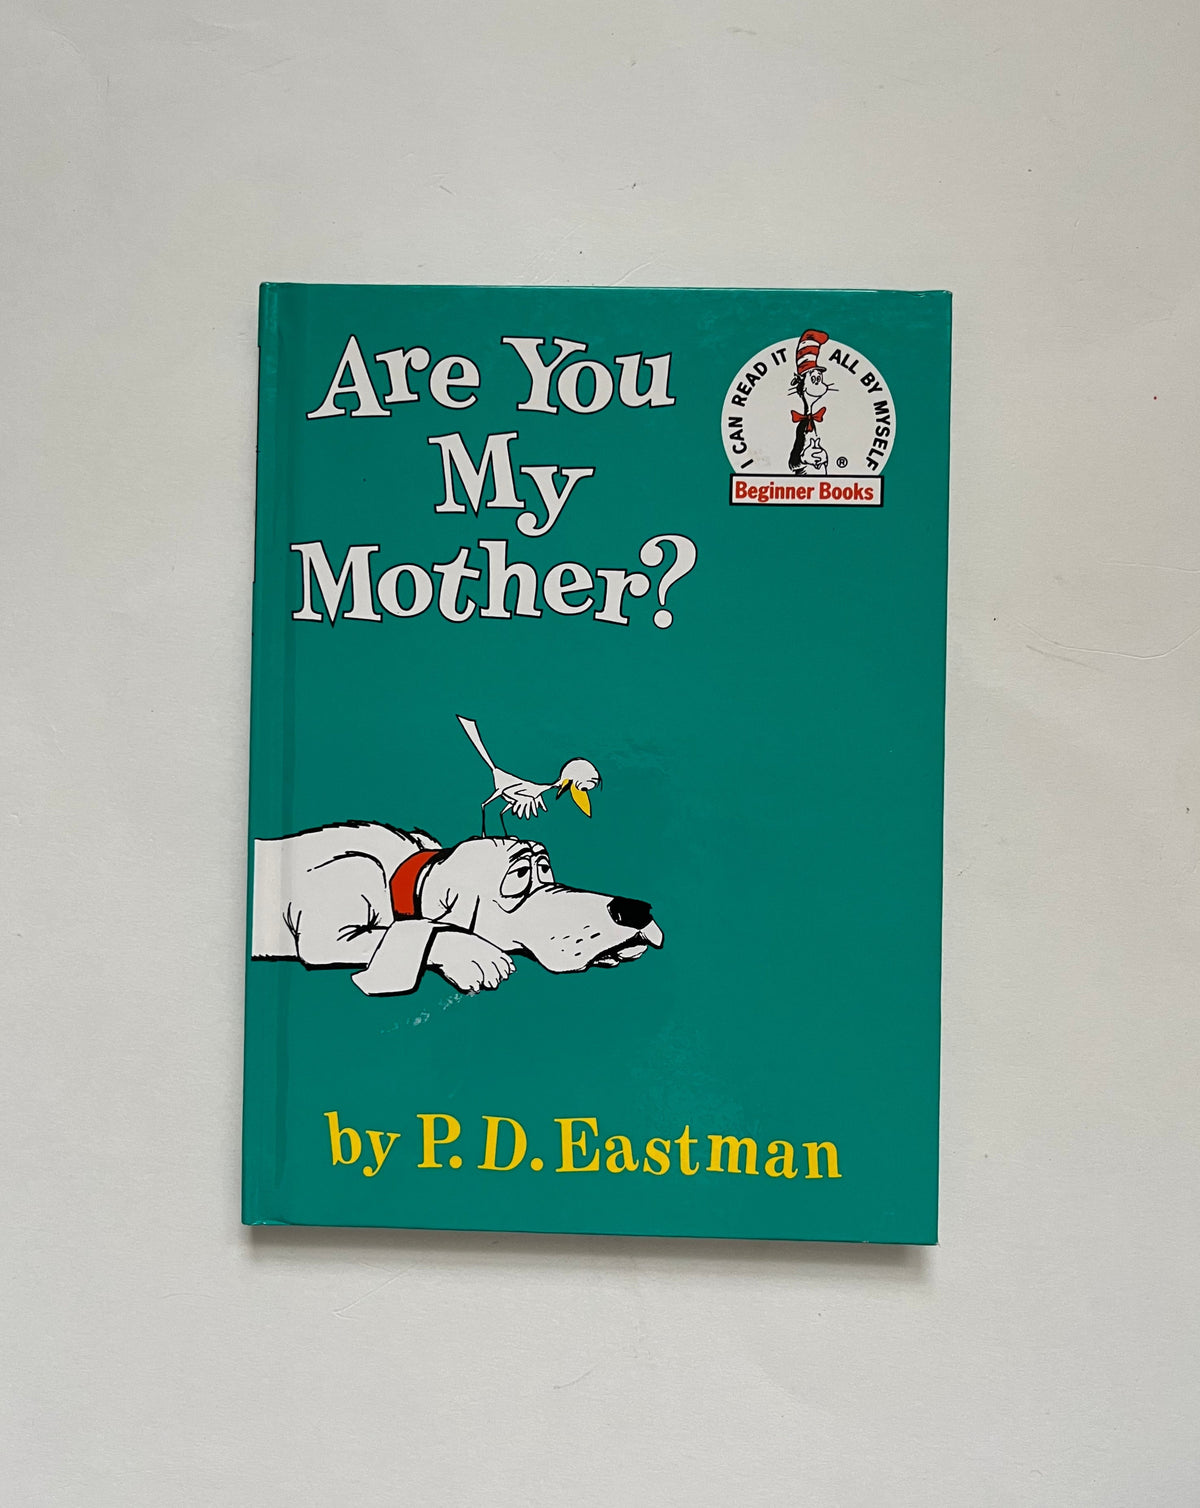 Are You My Mother? by P.D. Eastman